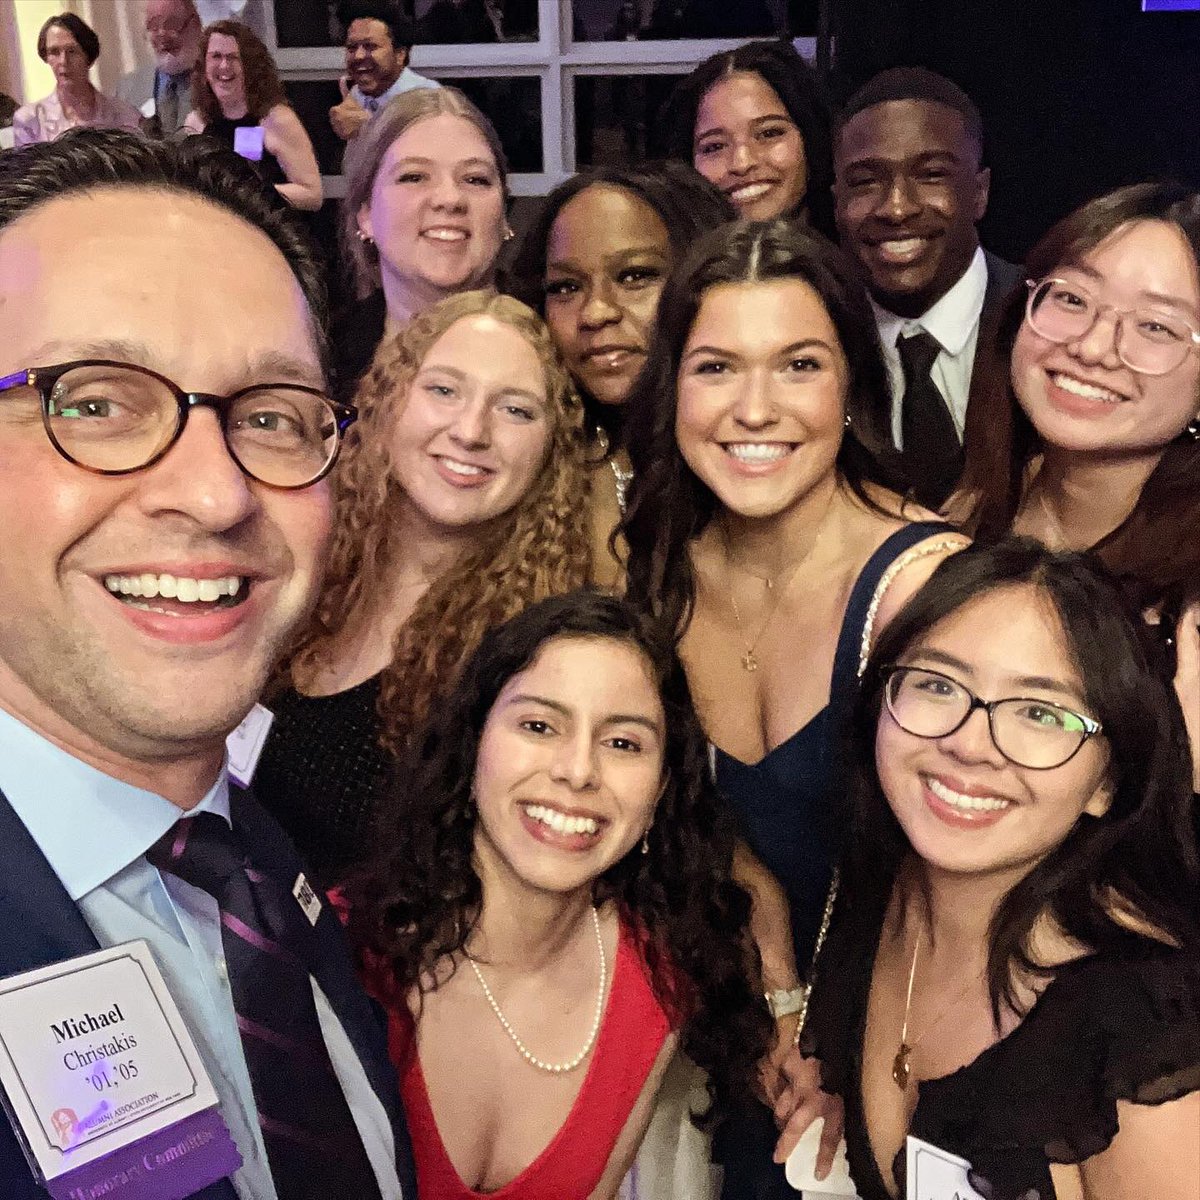 And, of course, no night would be complete without a selfie with our incomparable Purple & Gold Ambassadors — simply some of our very best @UAlbany students!